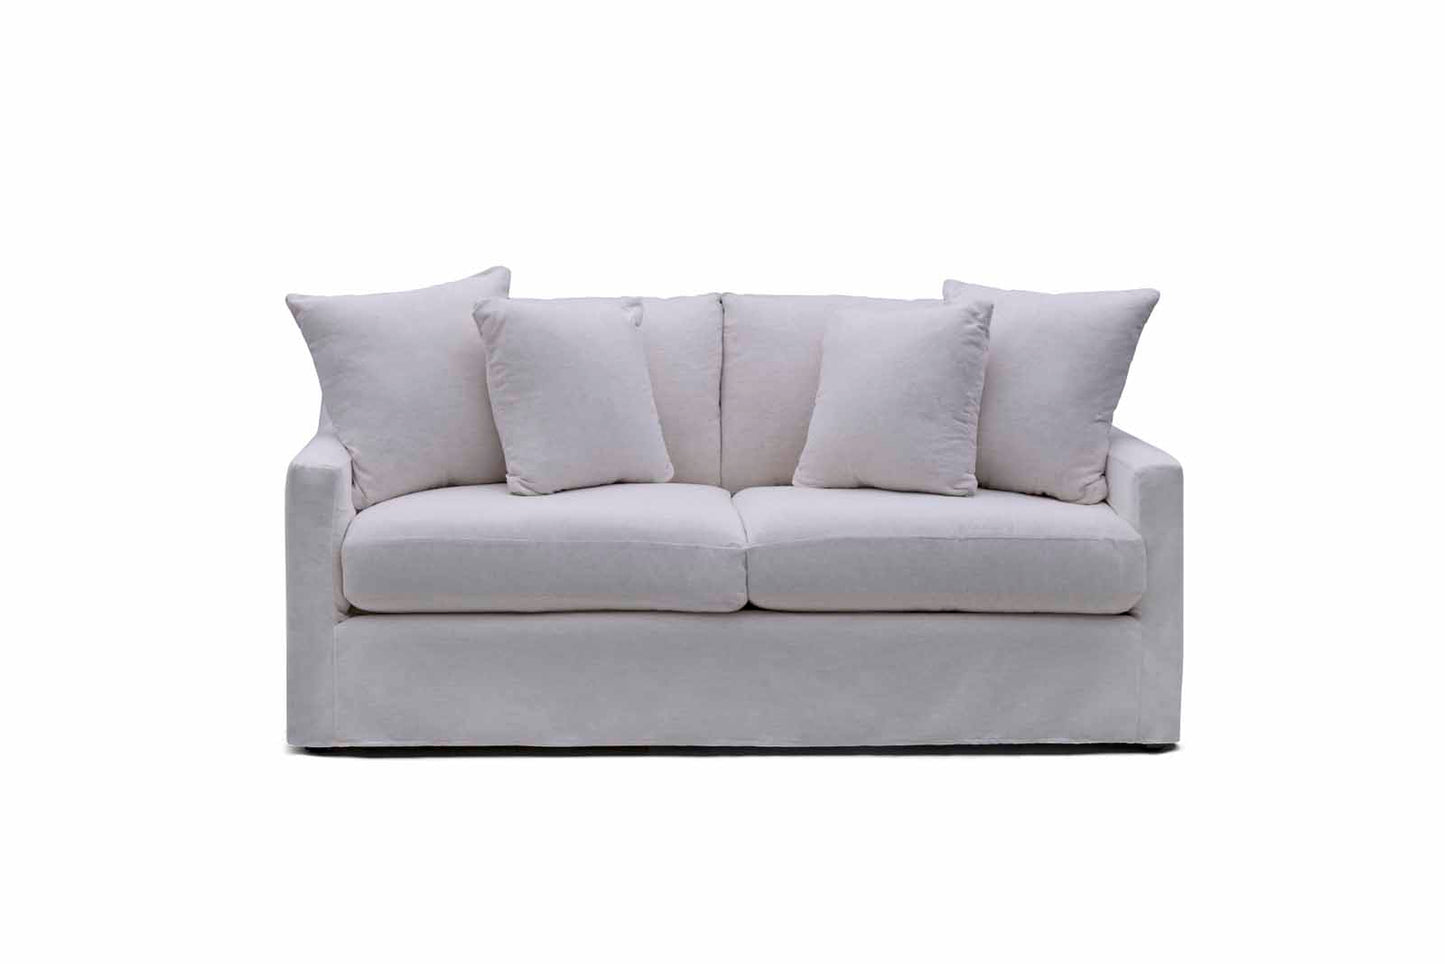 Reese Queen Sleeper Sofa in Nomad Snow Fabric